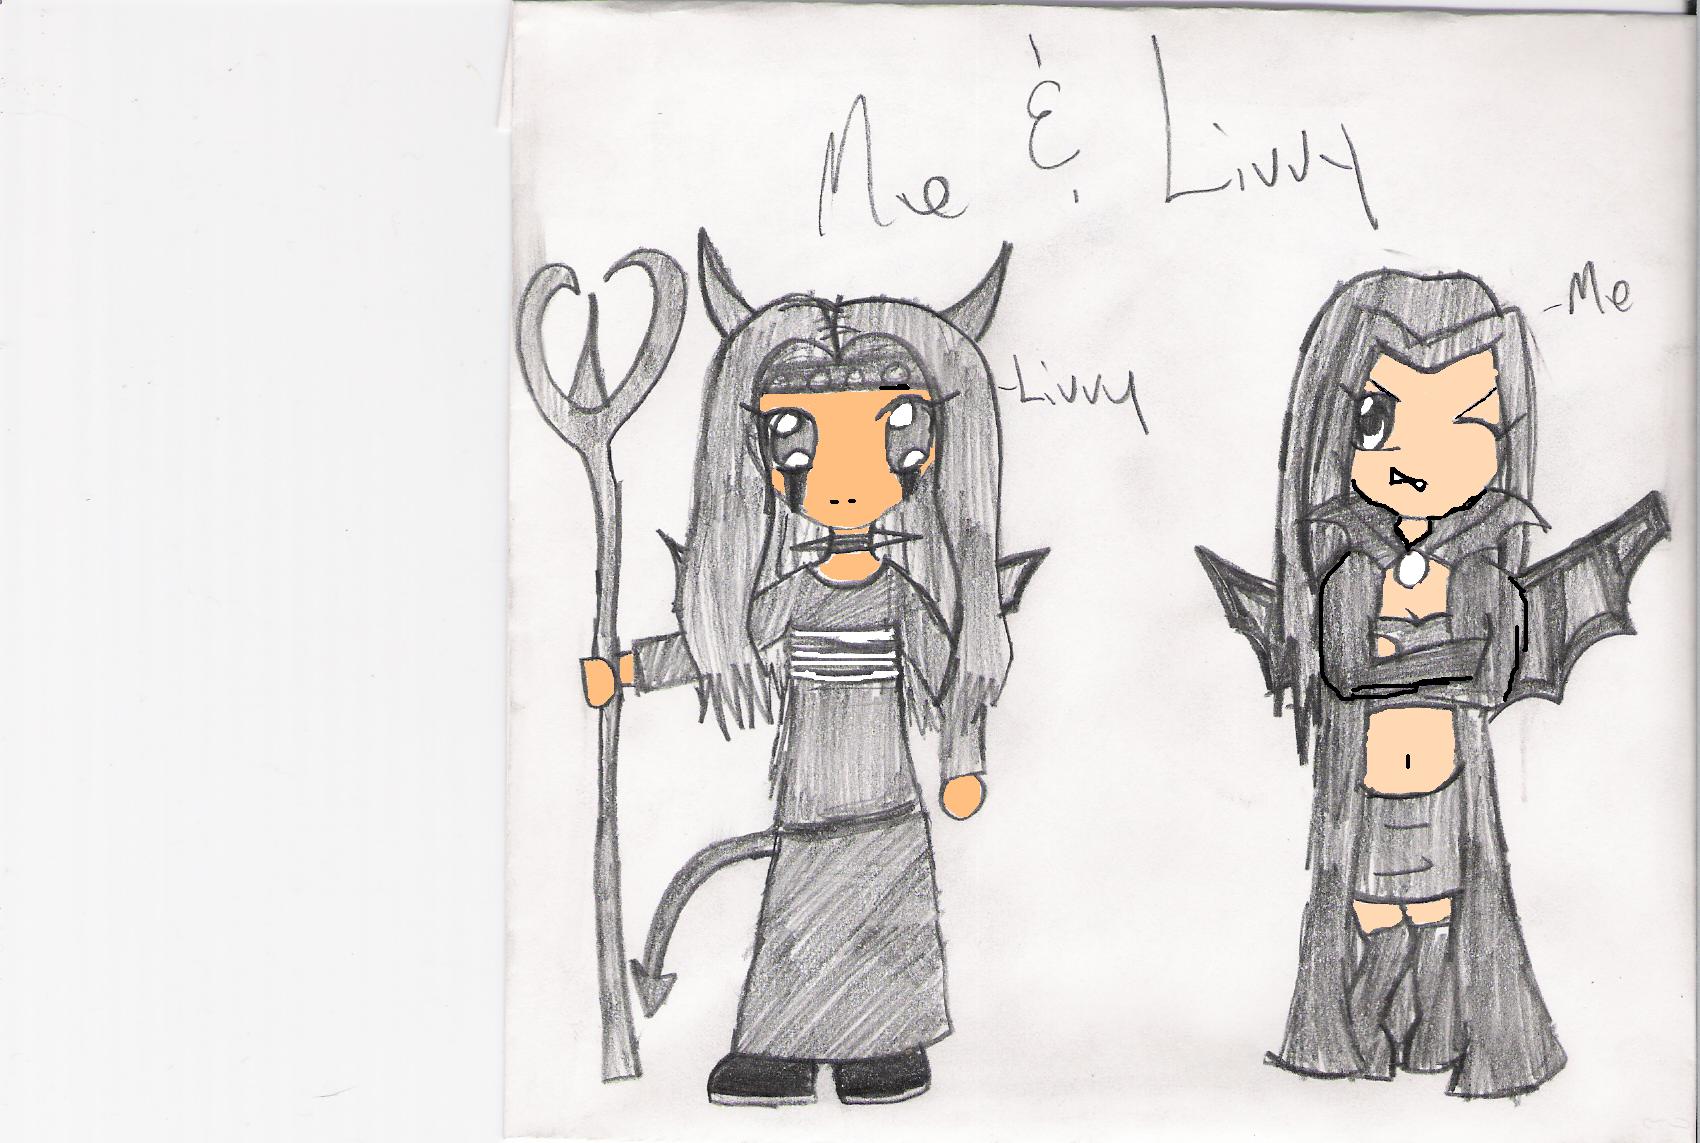 Me and Livvy as goth chibis (For anime_beauty) by BonzsGirlie